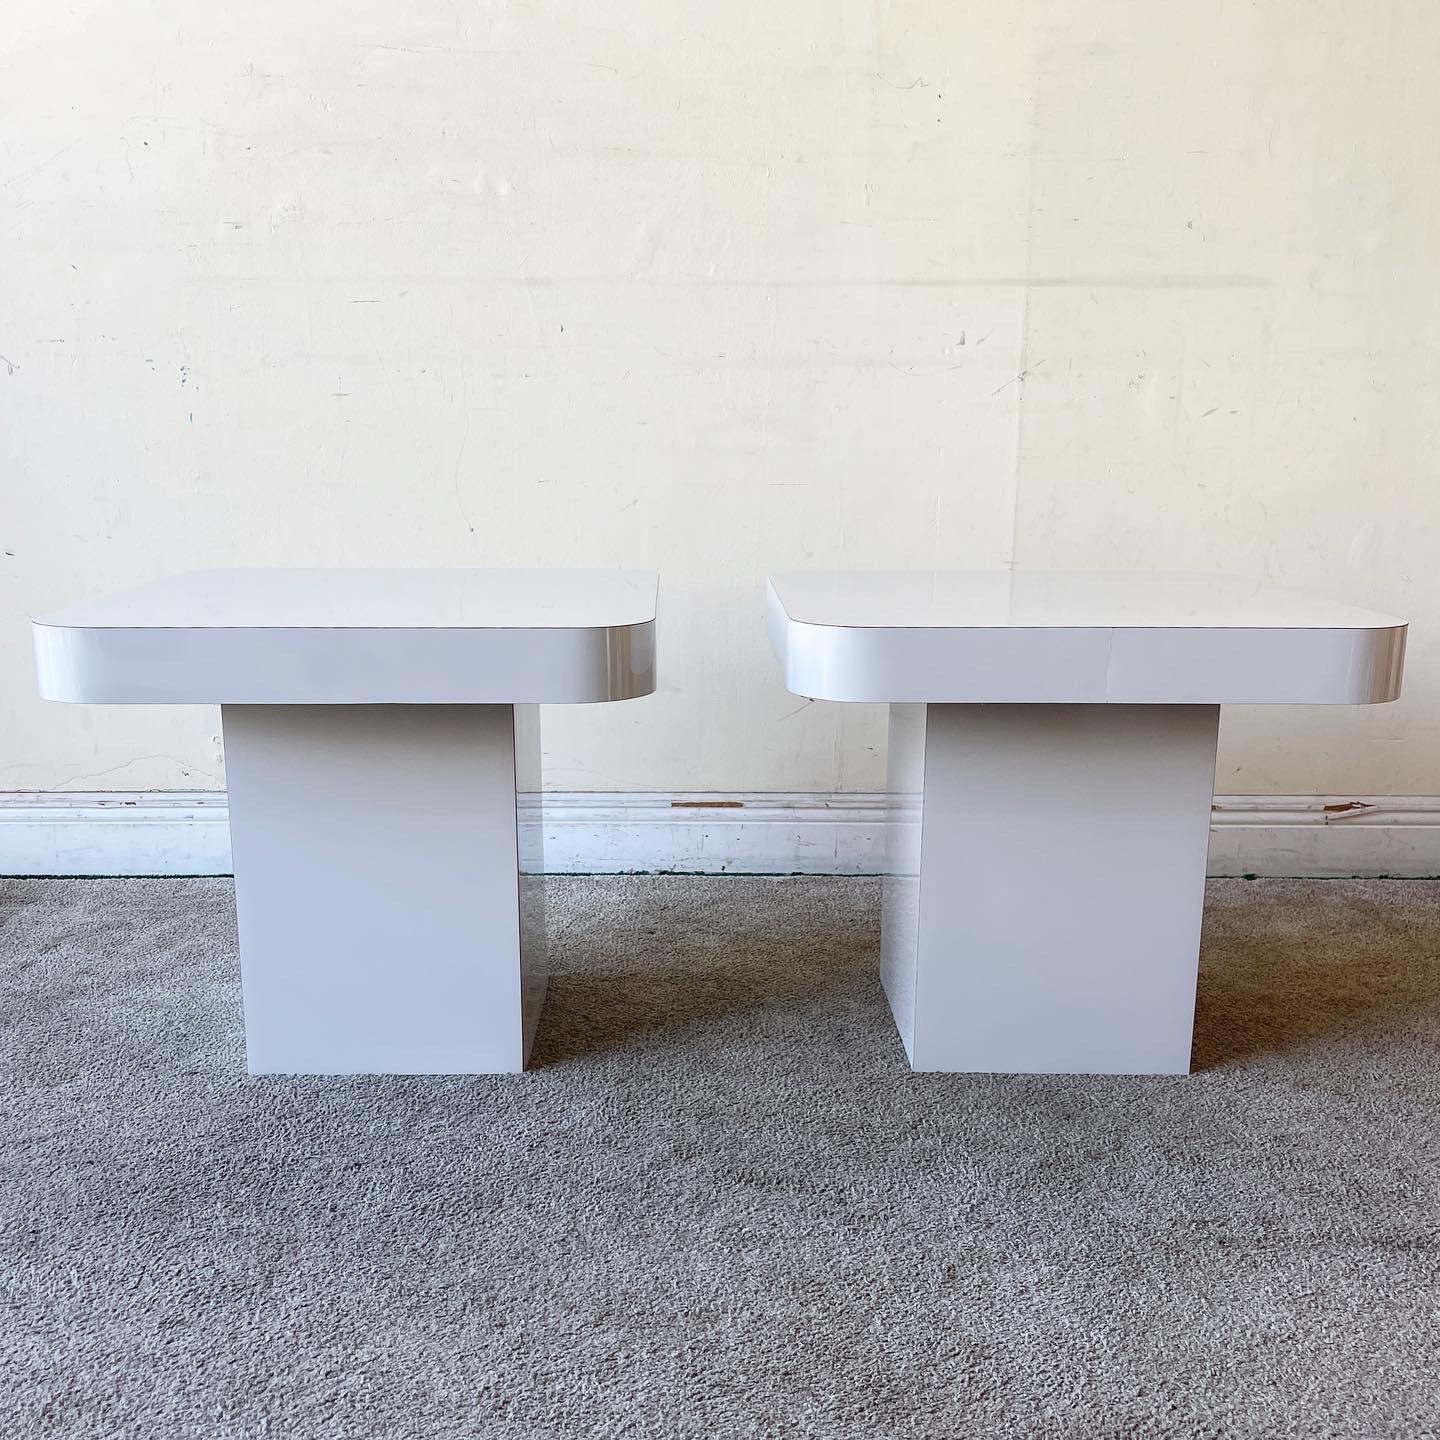 Late 20th Century Postmodern Light Gray Lacquer Laminate Mushroom Side Tables - a Pair For Sale